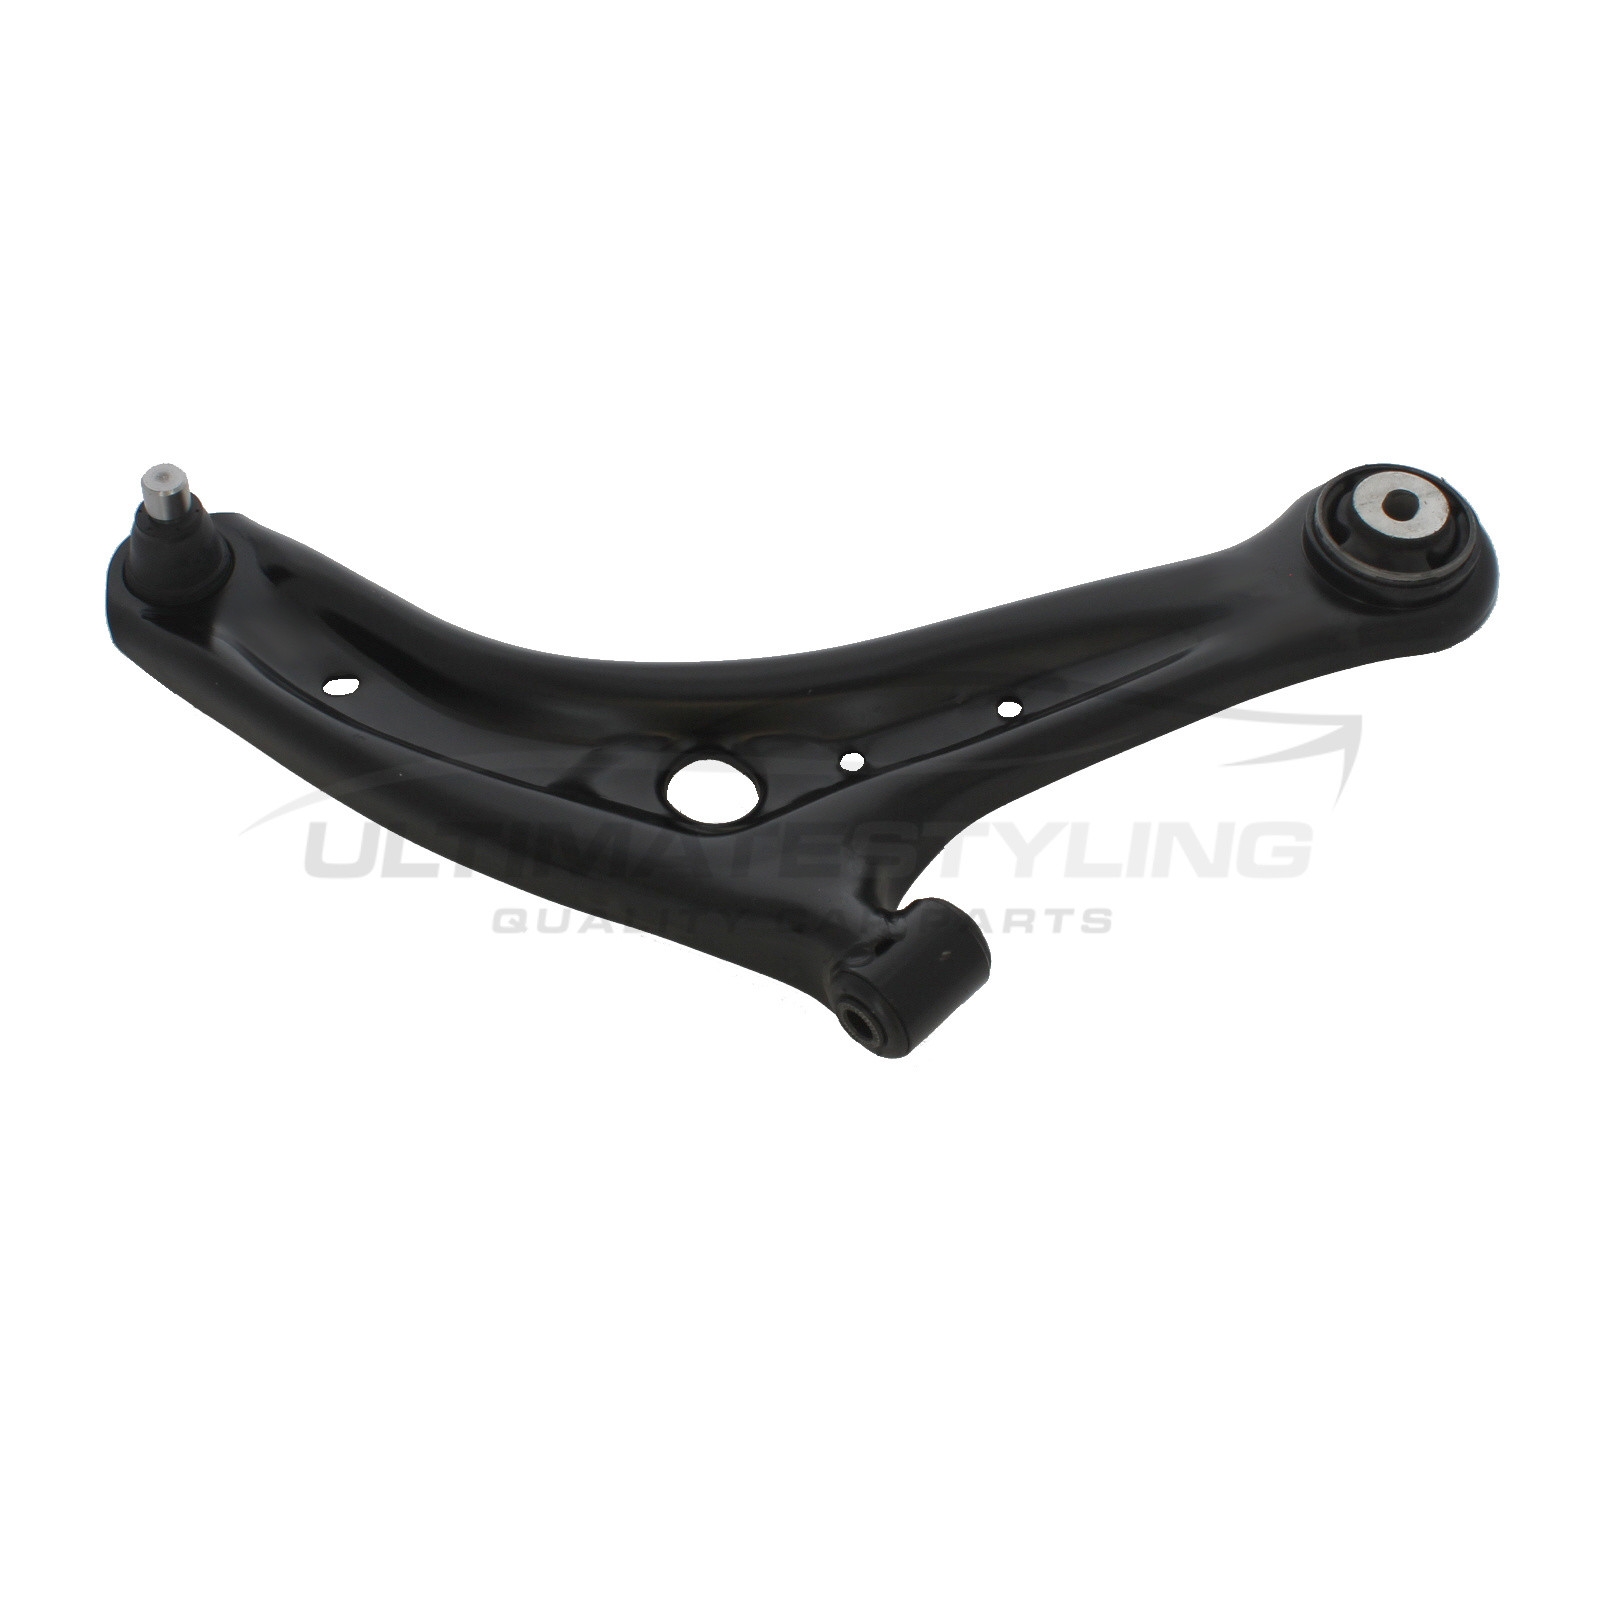 Ford Fiesta 2008-2018, Ford Ka+ 2016-2020, Ford Ka+ Active 2018-2020, Mazda 2 2007-2015 Front Lower Suspension Arm (Steel) Including Ball Joint and Rear Bush Driver Side (RH)